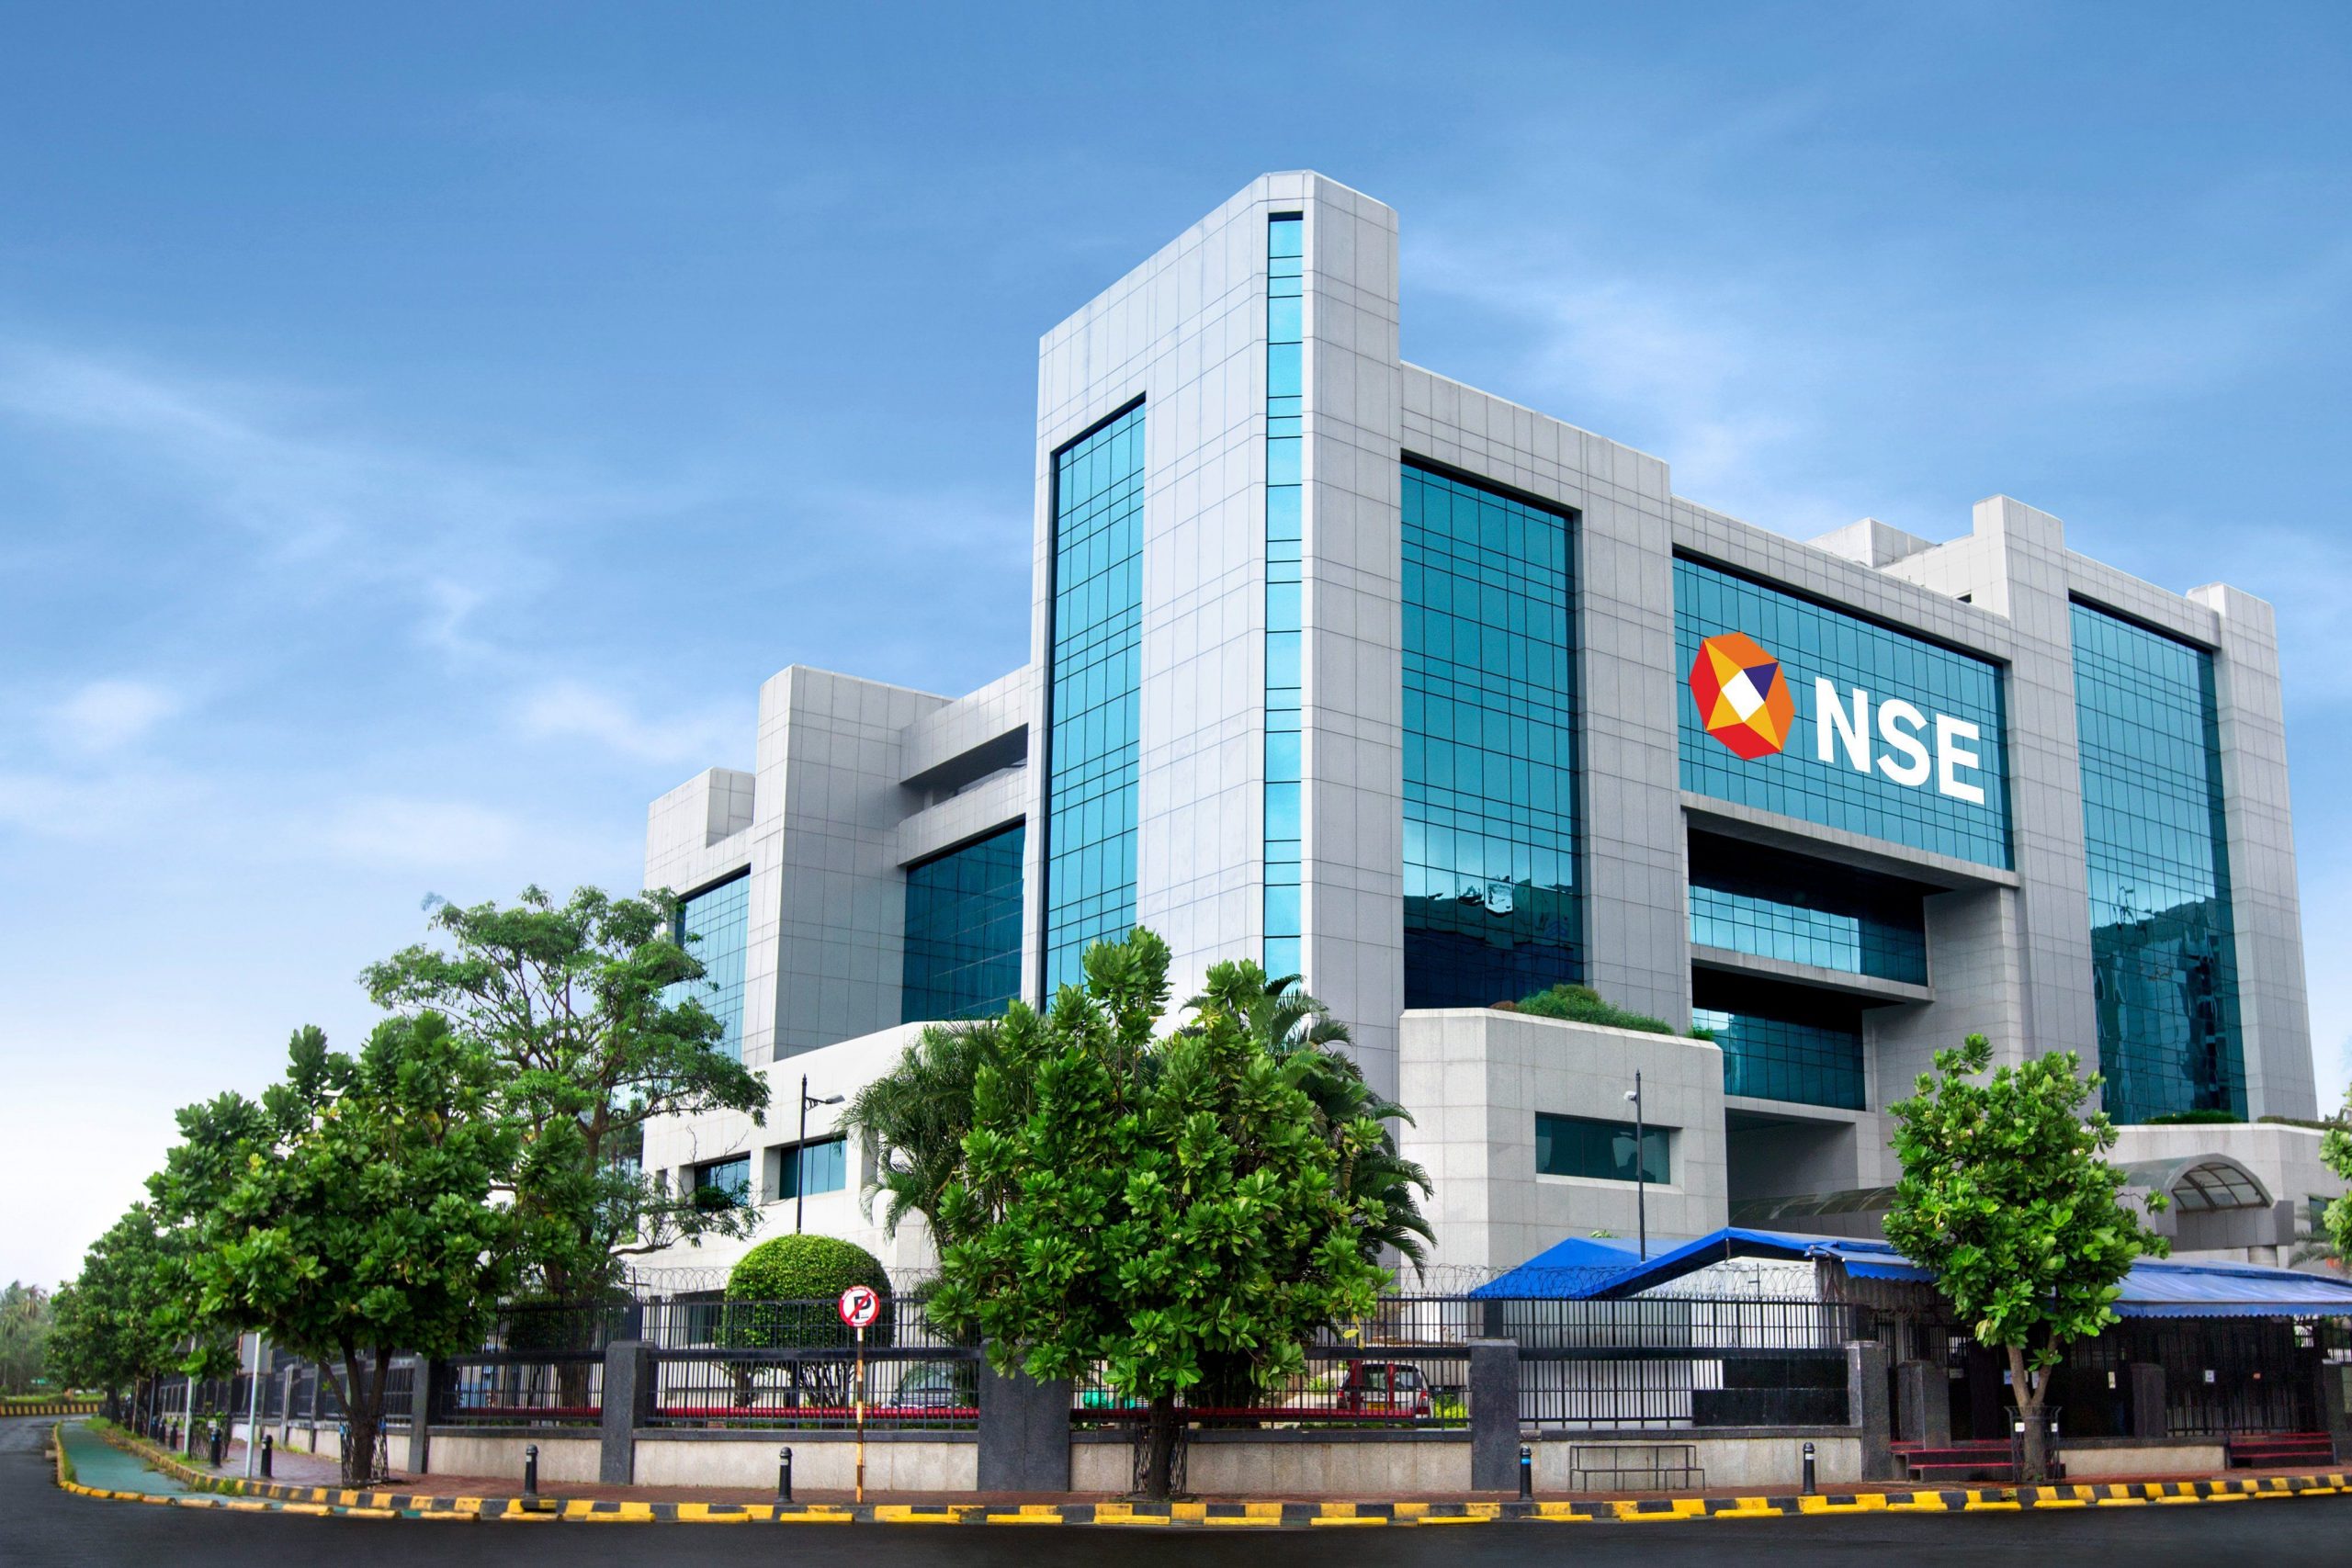 NSE F&O Ban: IHFL, RBL Bank and others under ban on Friday, June 24, 2022